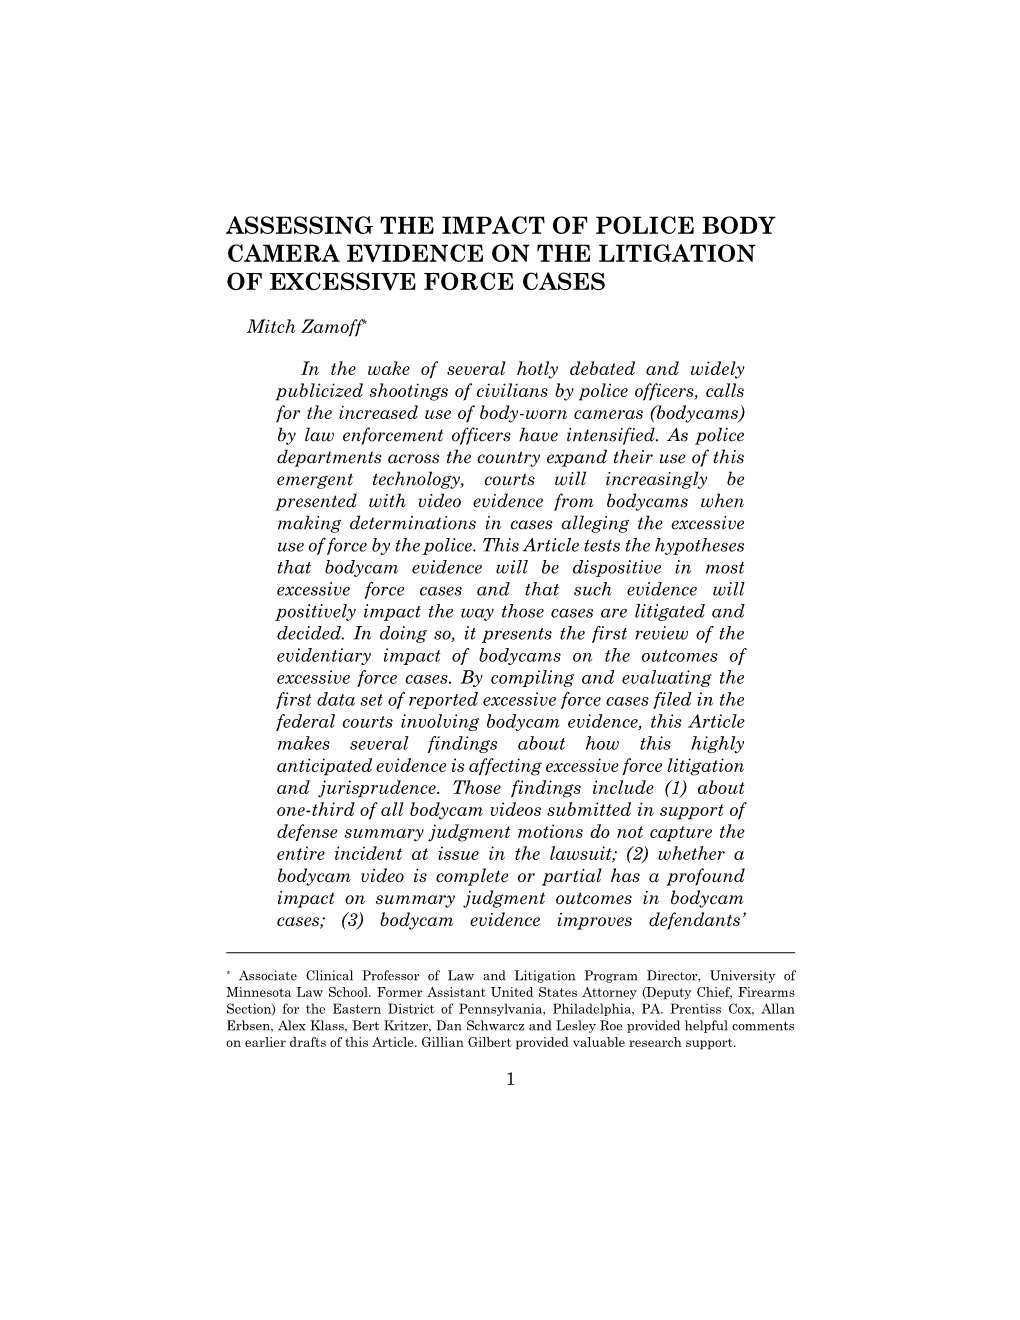 Assessing the Impact of Police Body Camera Evidence on the Litigation of Excessive Force Cases